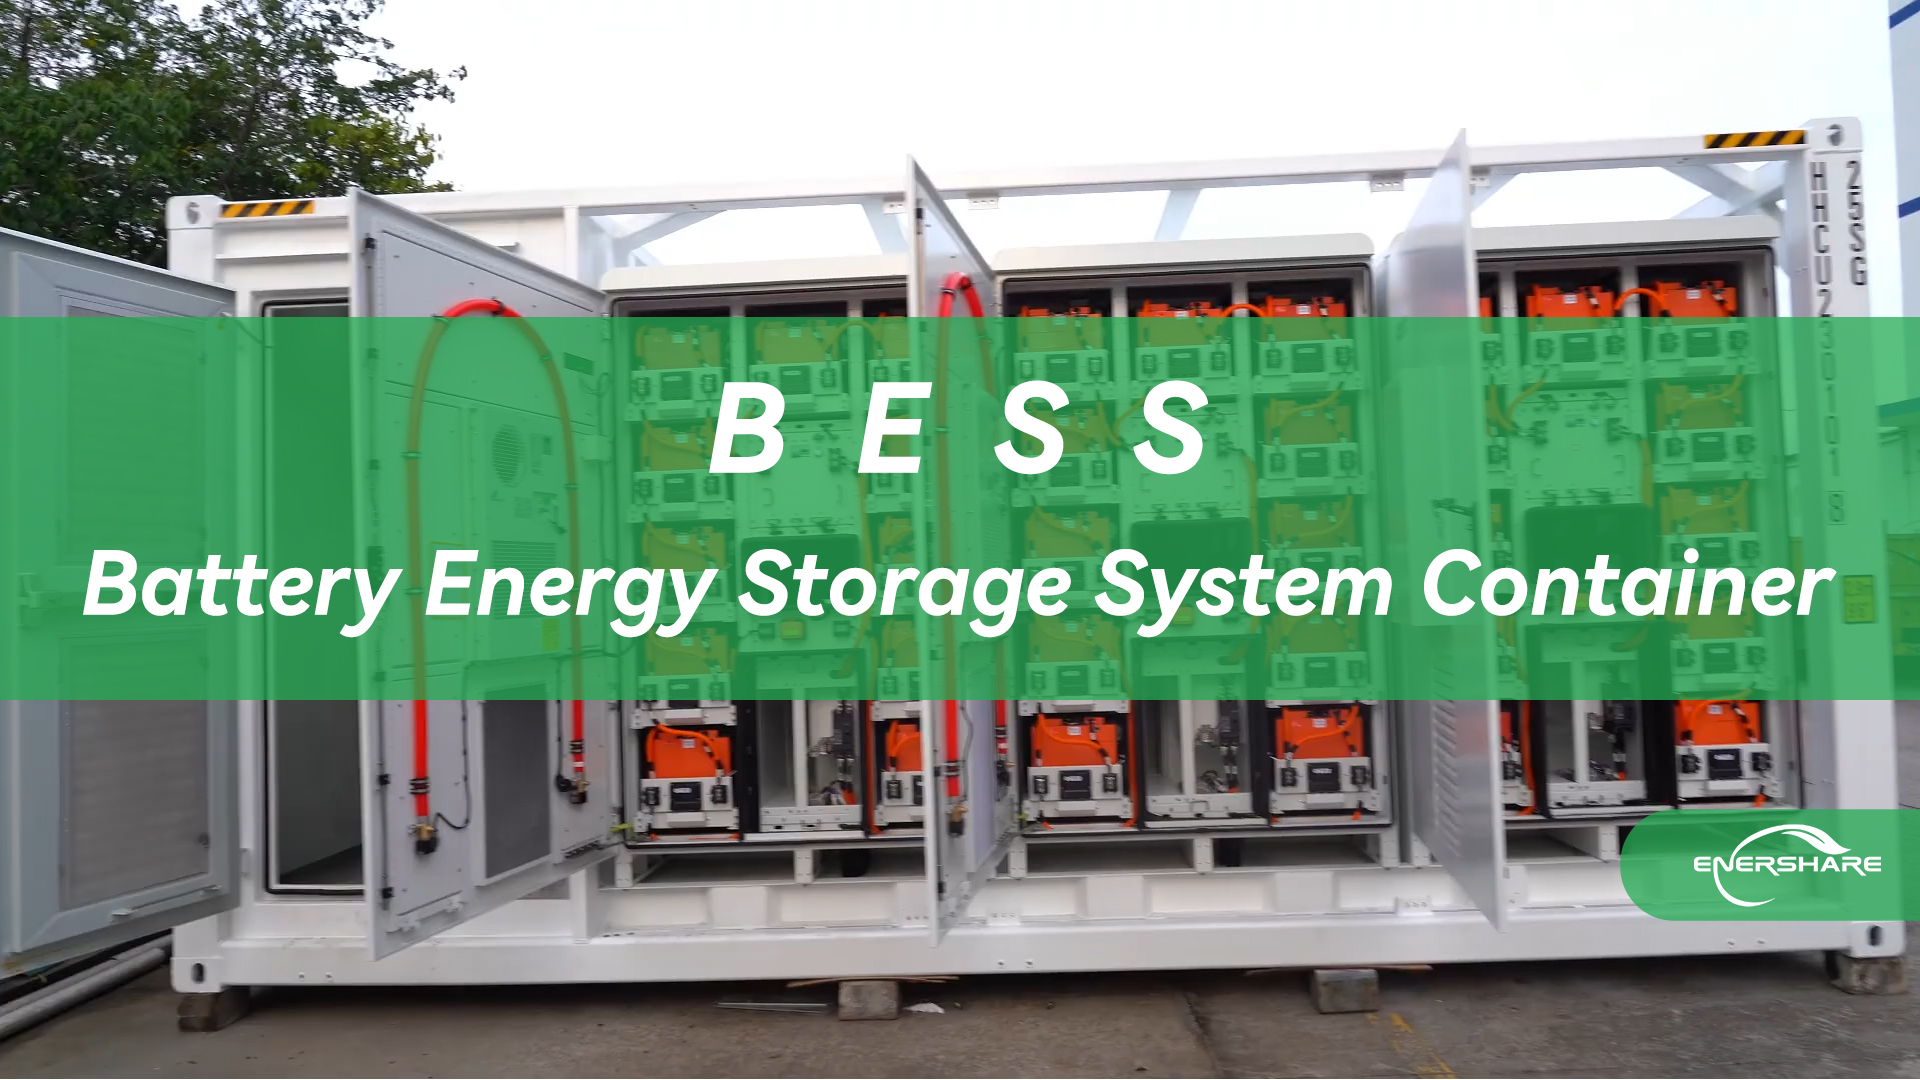 Bess- Battery energy storage system